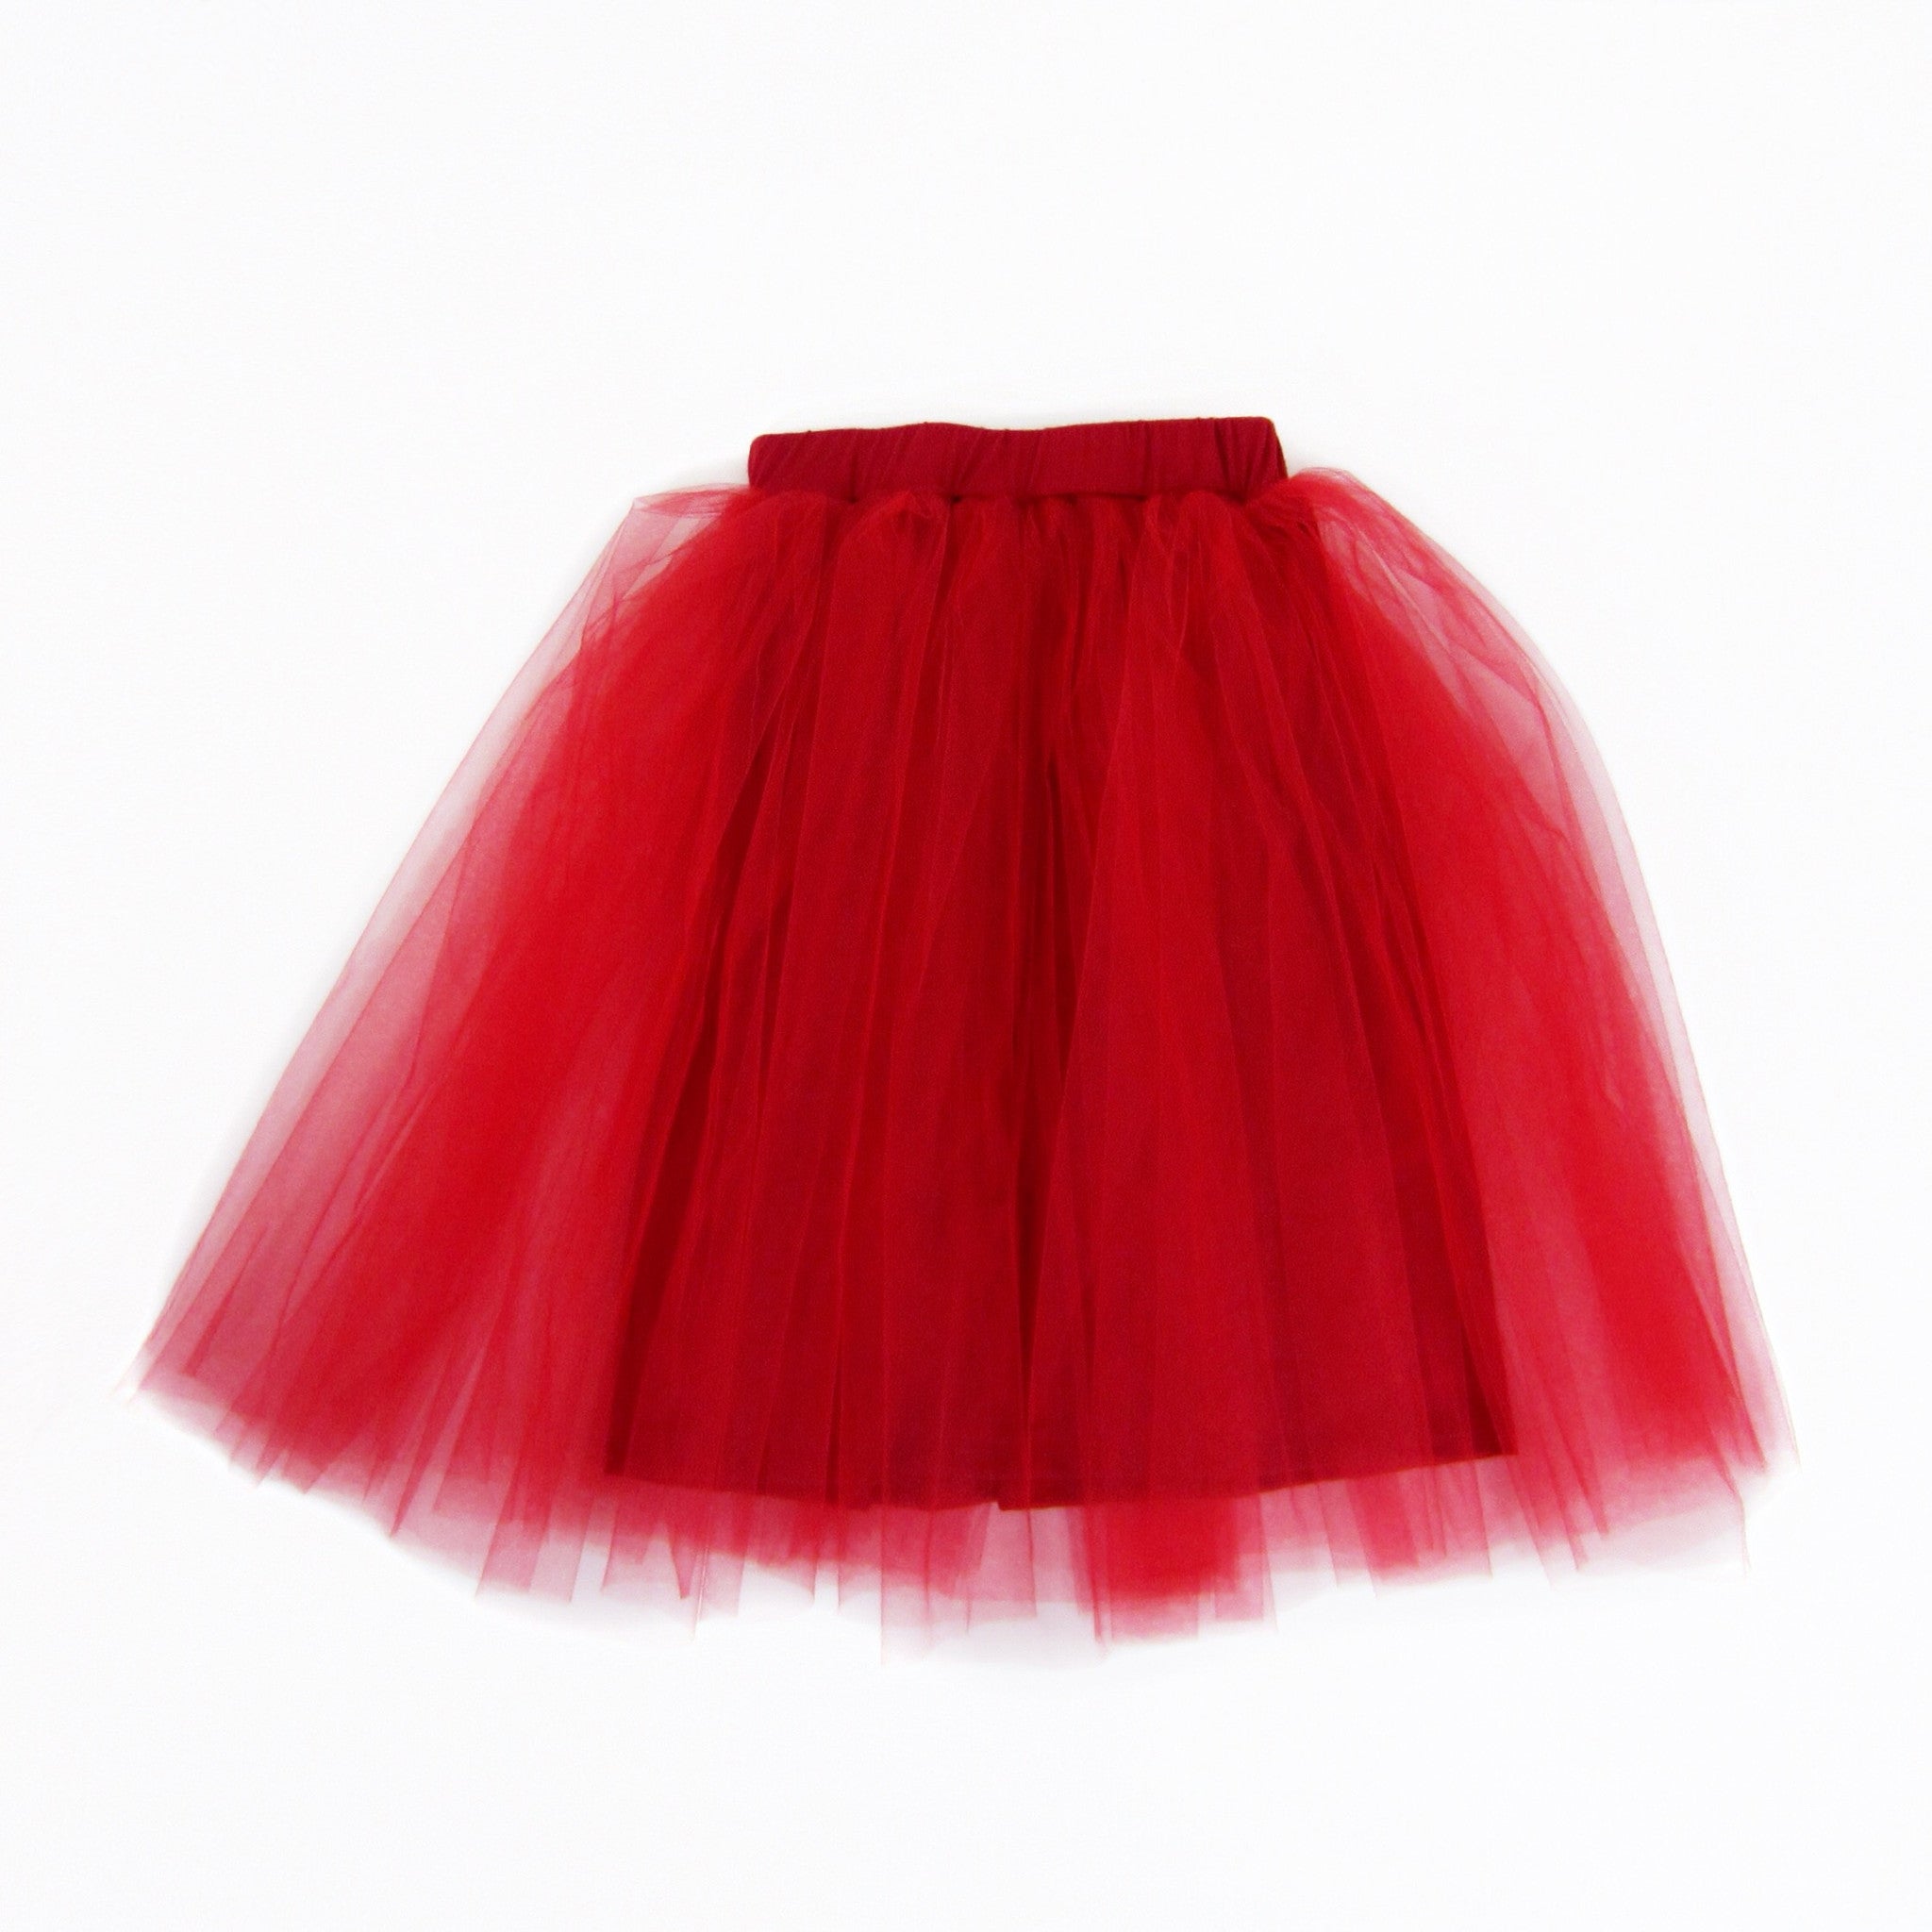 Girls Clothes | Girls Red Tulle Skirt 